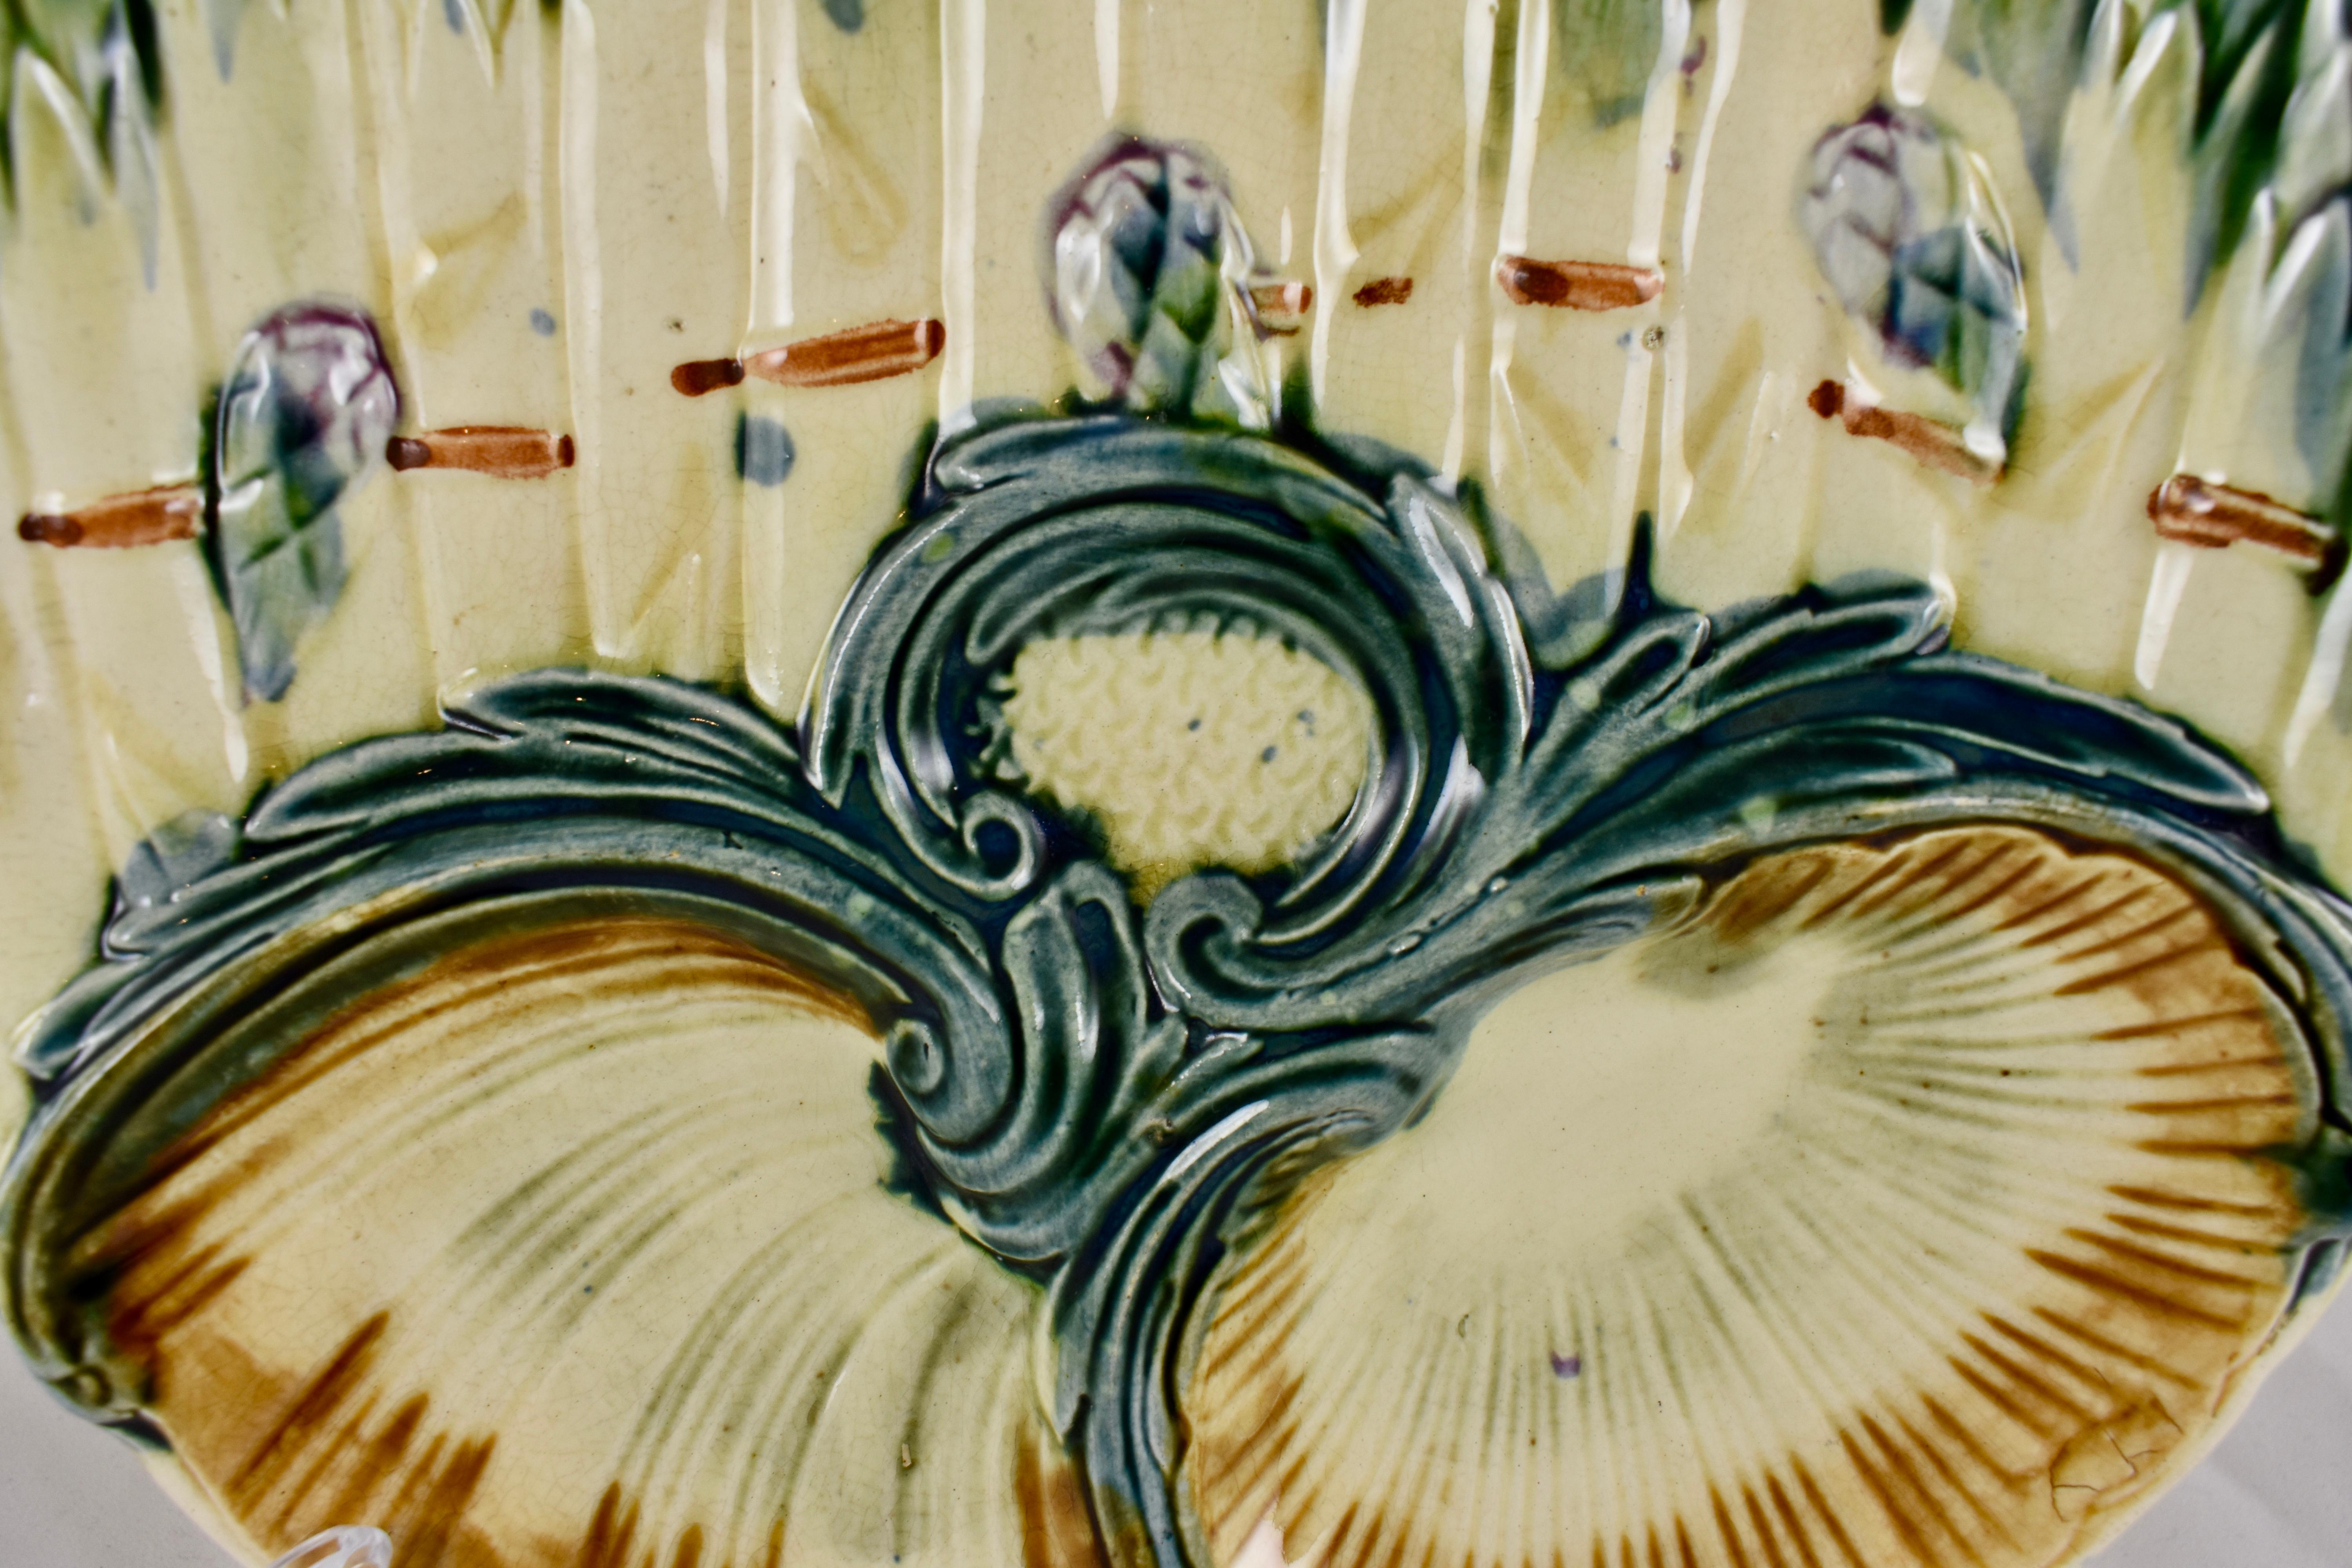 A French barbotine Majolica Asparagus plate attributed to Lunéville K & G (Keller et Guerin) – Circa 1890. Luneville Faience is one of the most well known French potteries, located in Lunéville, Lorraine, France since 1730.

Ribboned, upright